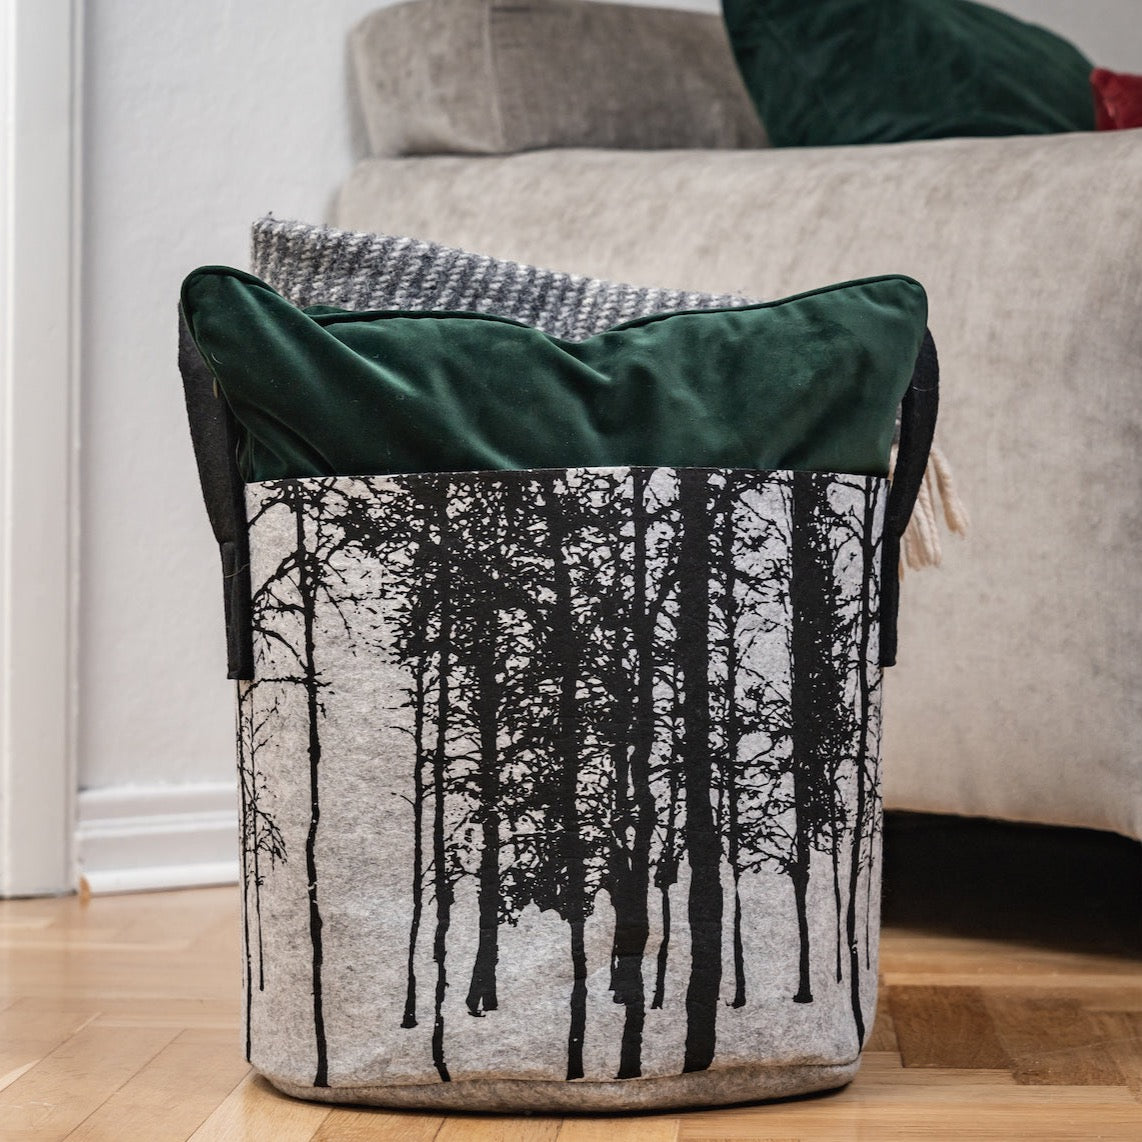 Muurla Design The Forest Storage Bags made of recycled plastic